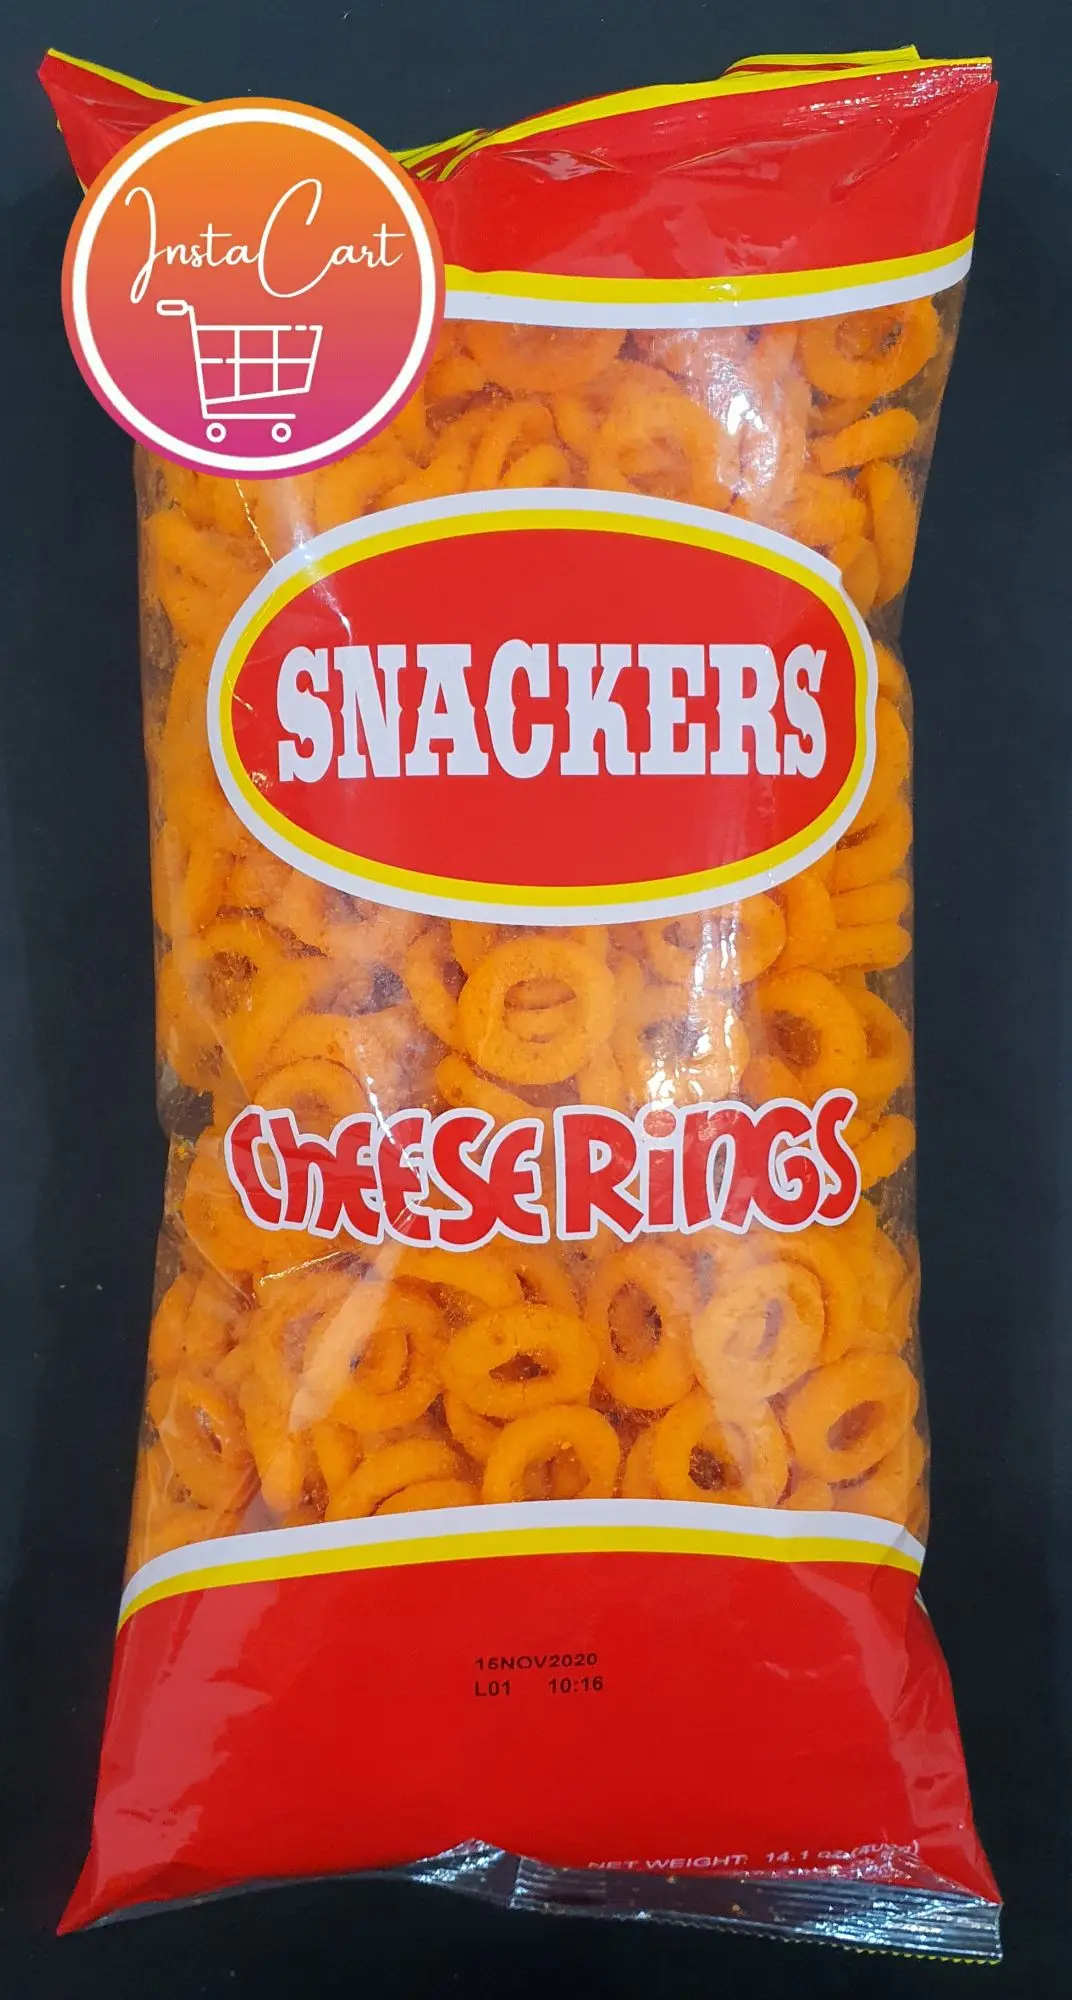 Snackers Cheese Ring